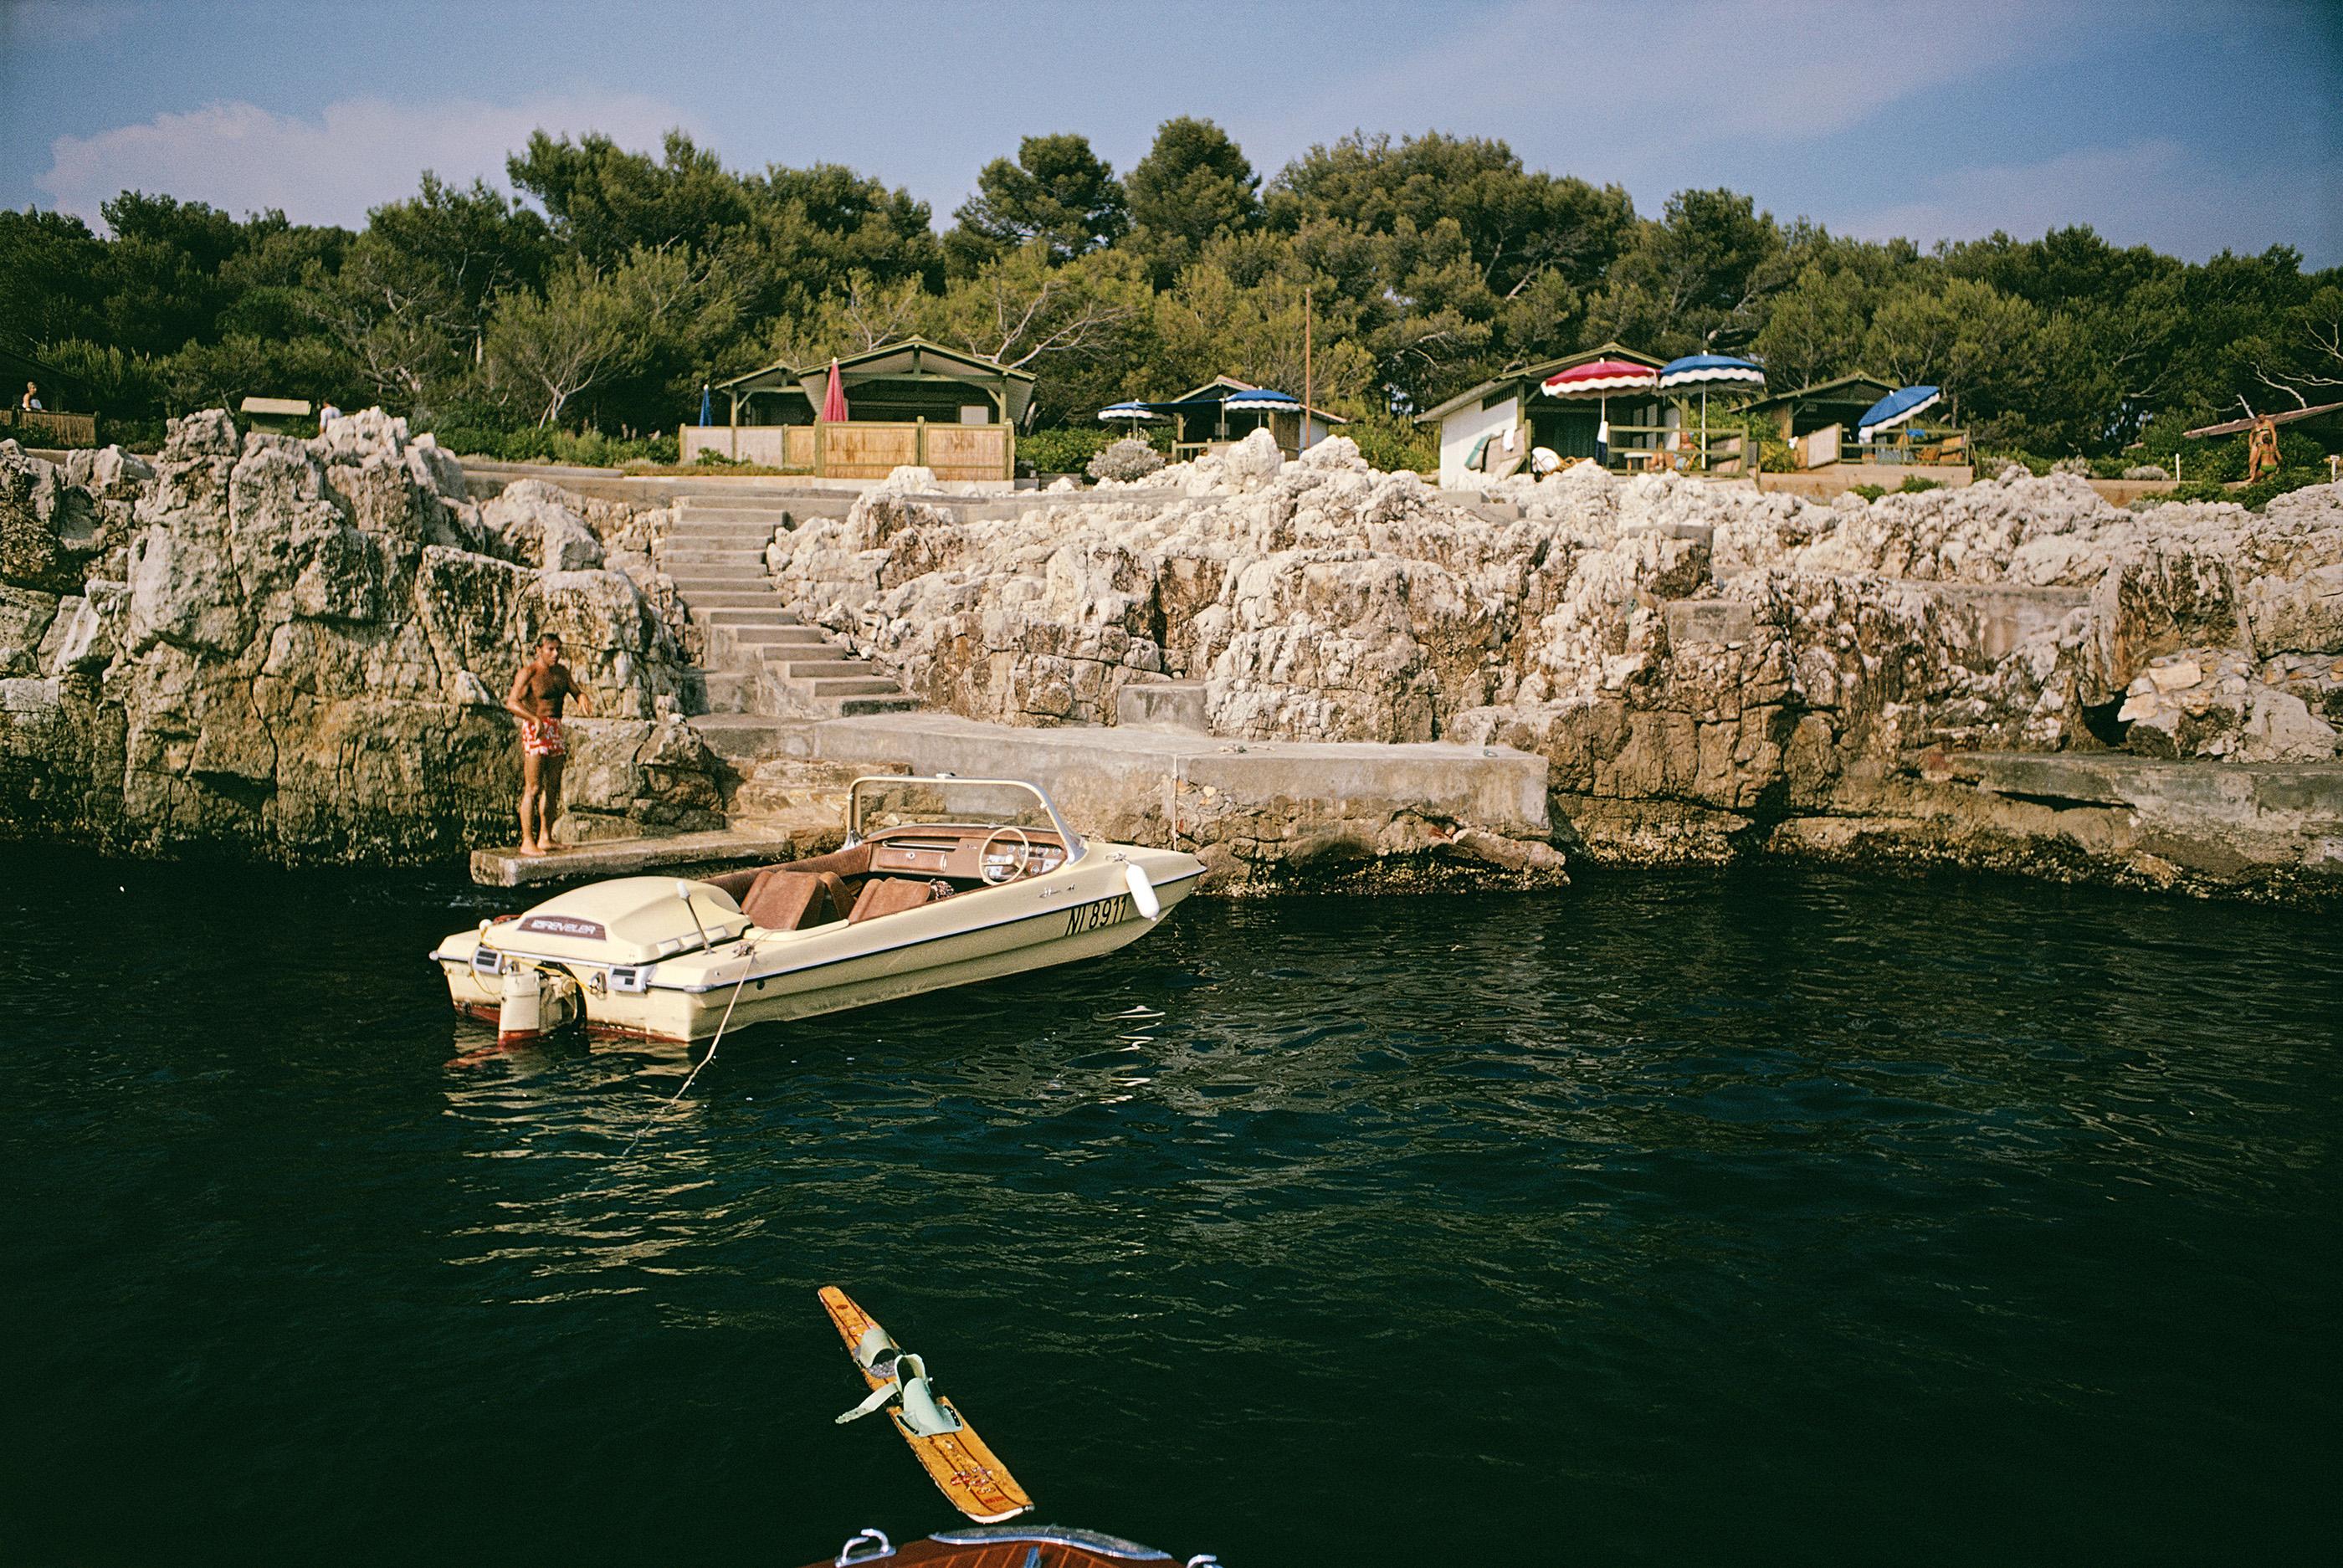 Towboat At Hotel Du Cap-Eden-Roc
1969 (printed later)
C print
Estate stamped and hand numbered edition of 150 with certificate of authenticity from the estate. 

A motorboat, used to tow waterskiiers, moored at the Hotel du Cap-Eden-Roc in Antibes